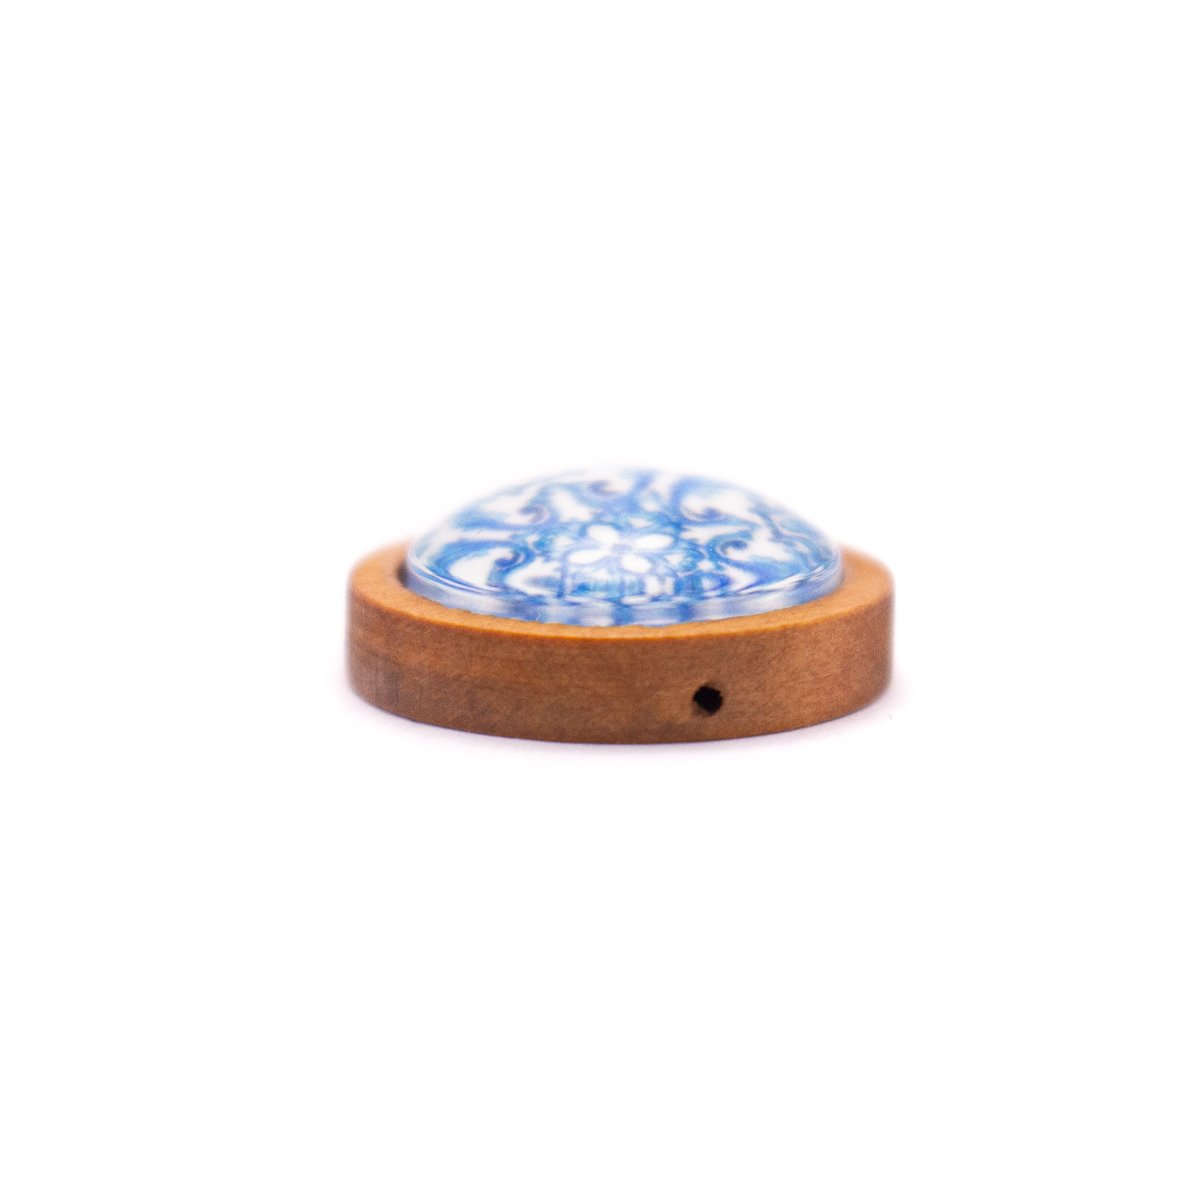 10pcs 20mm Round natural cork Portugal traditional ceramic tile pattern jewelry finding D-3-458